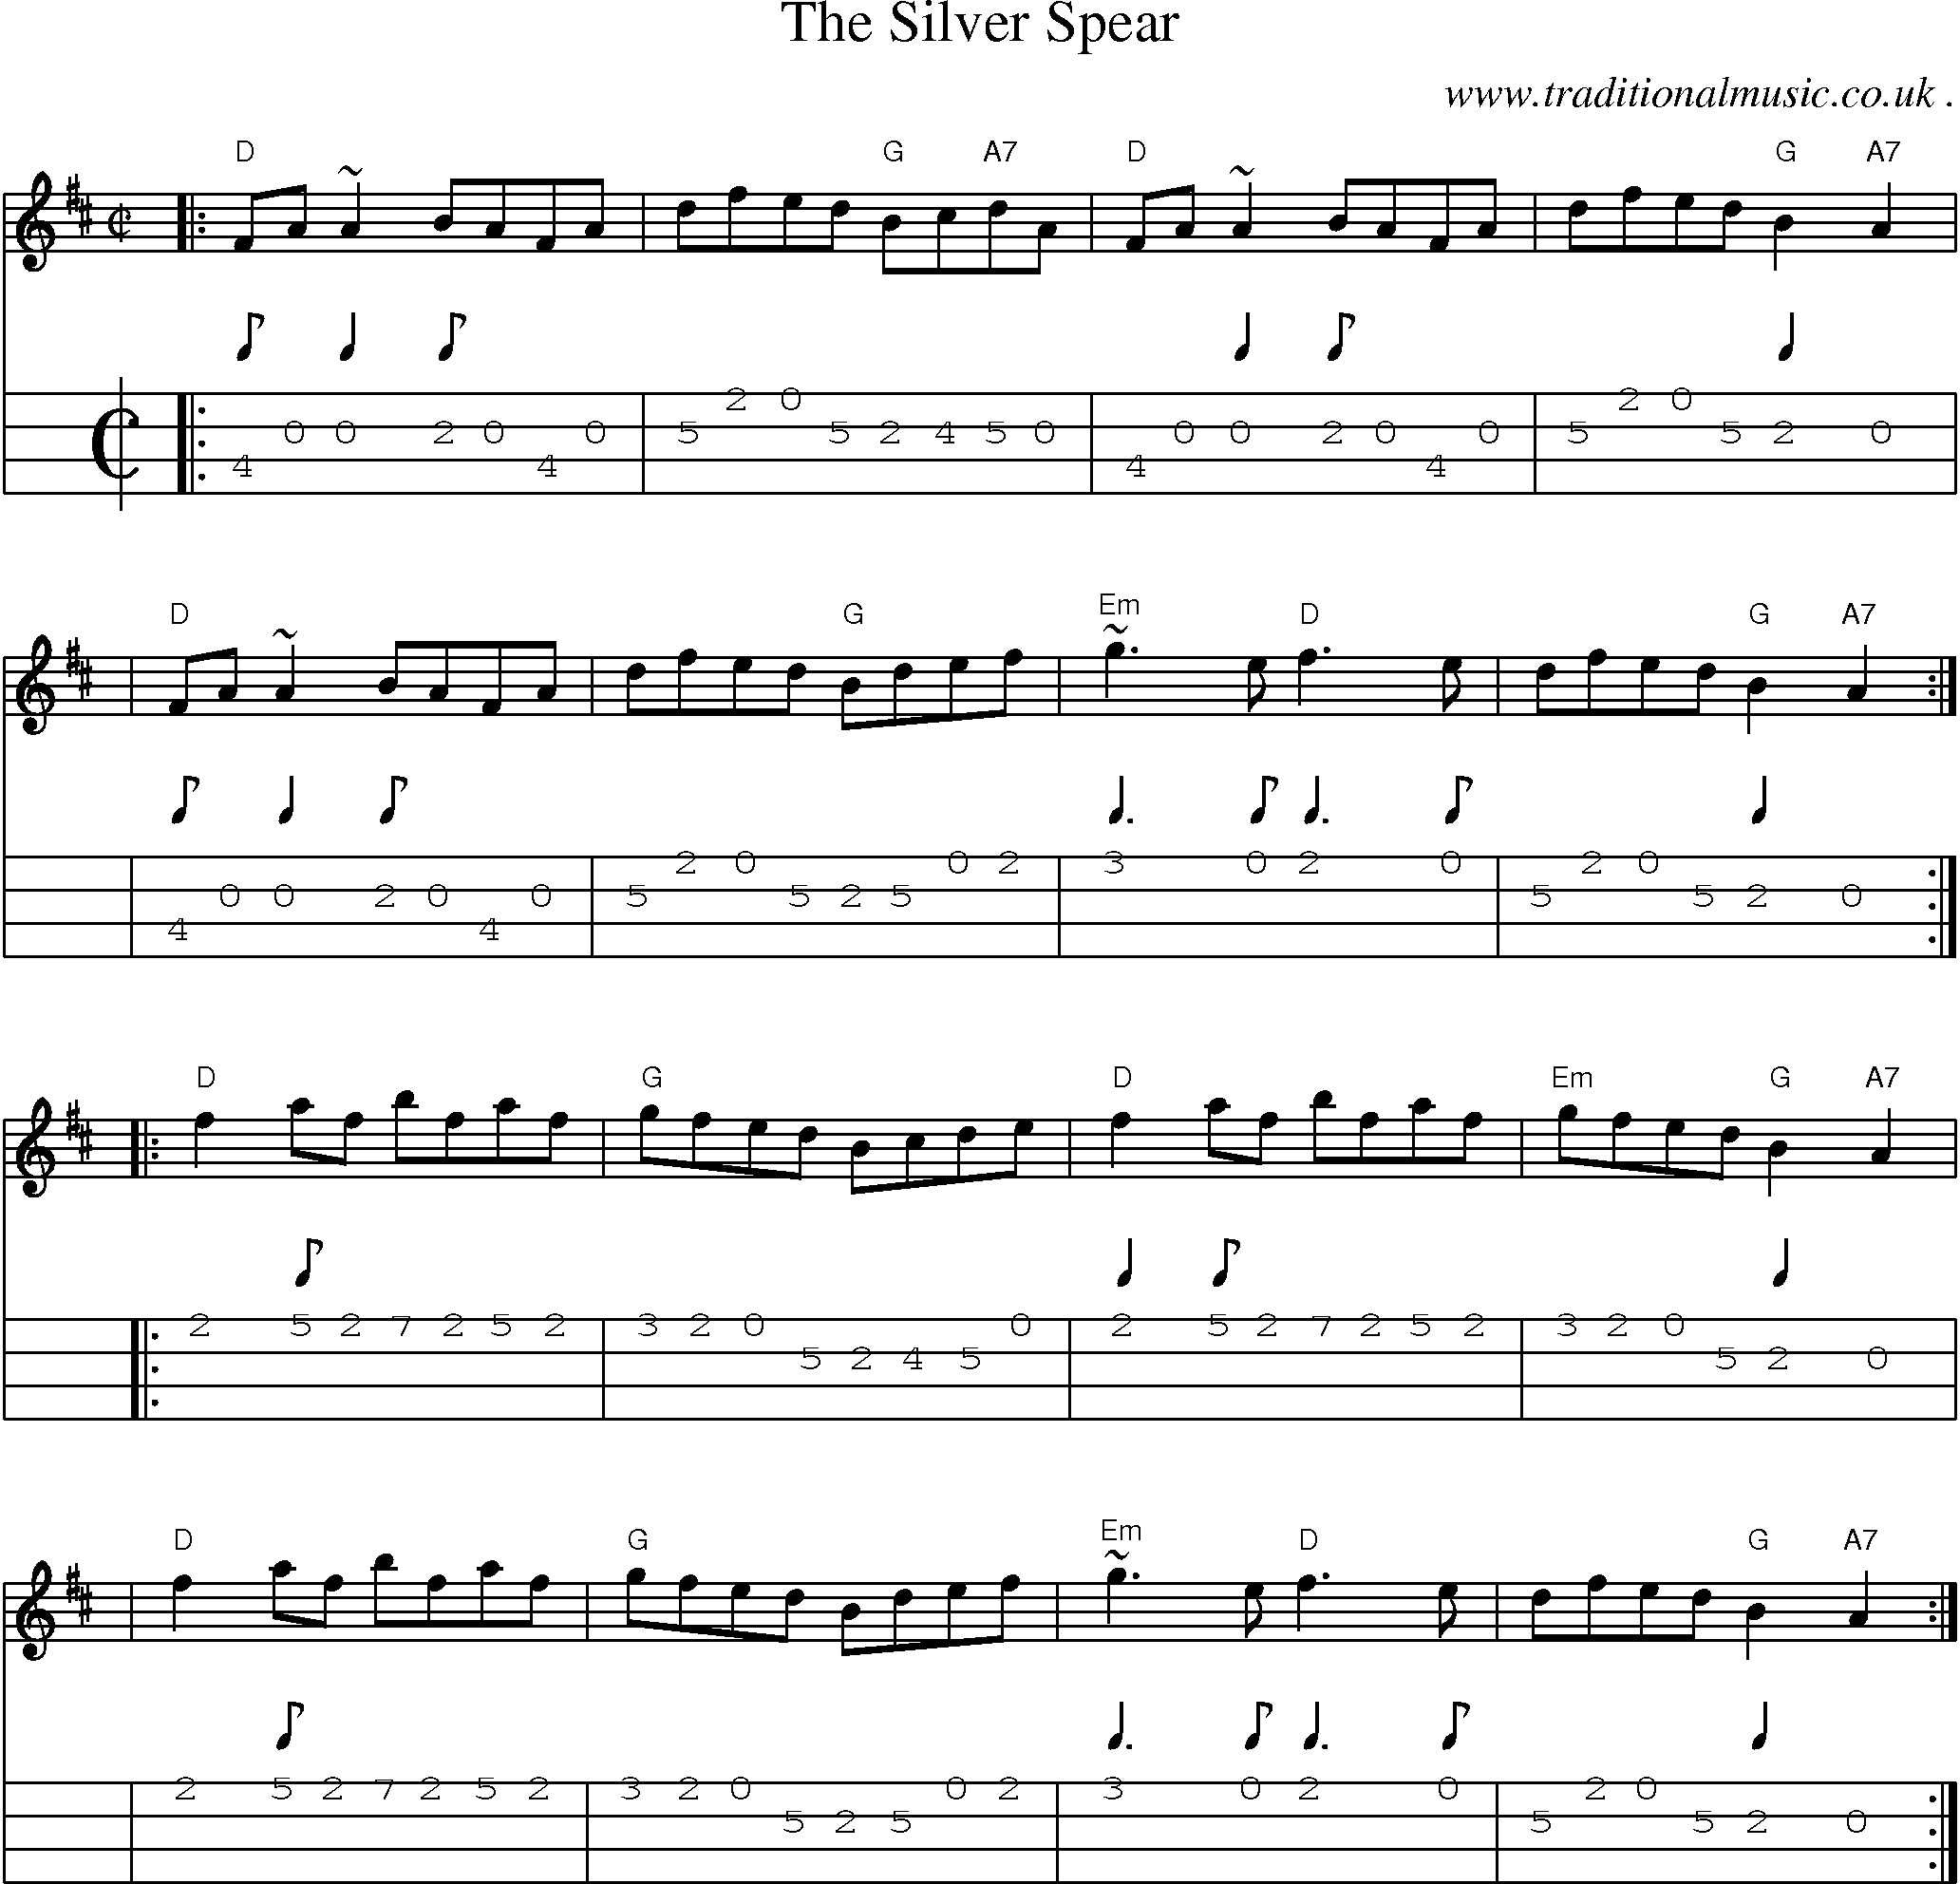 Sheet-music  score, Chords and Mandolin Tabs for The Silver Spear